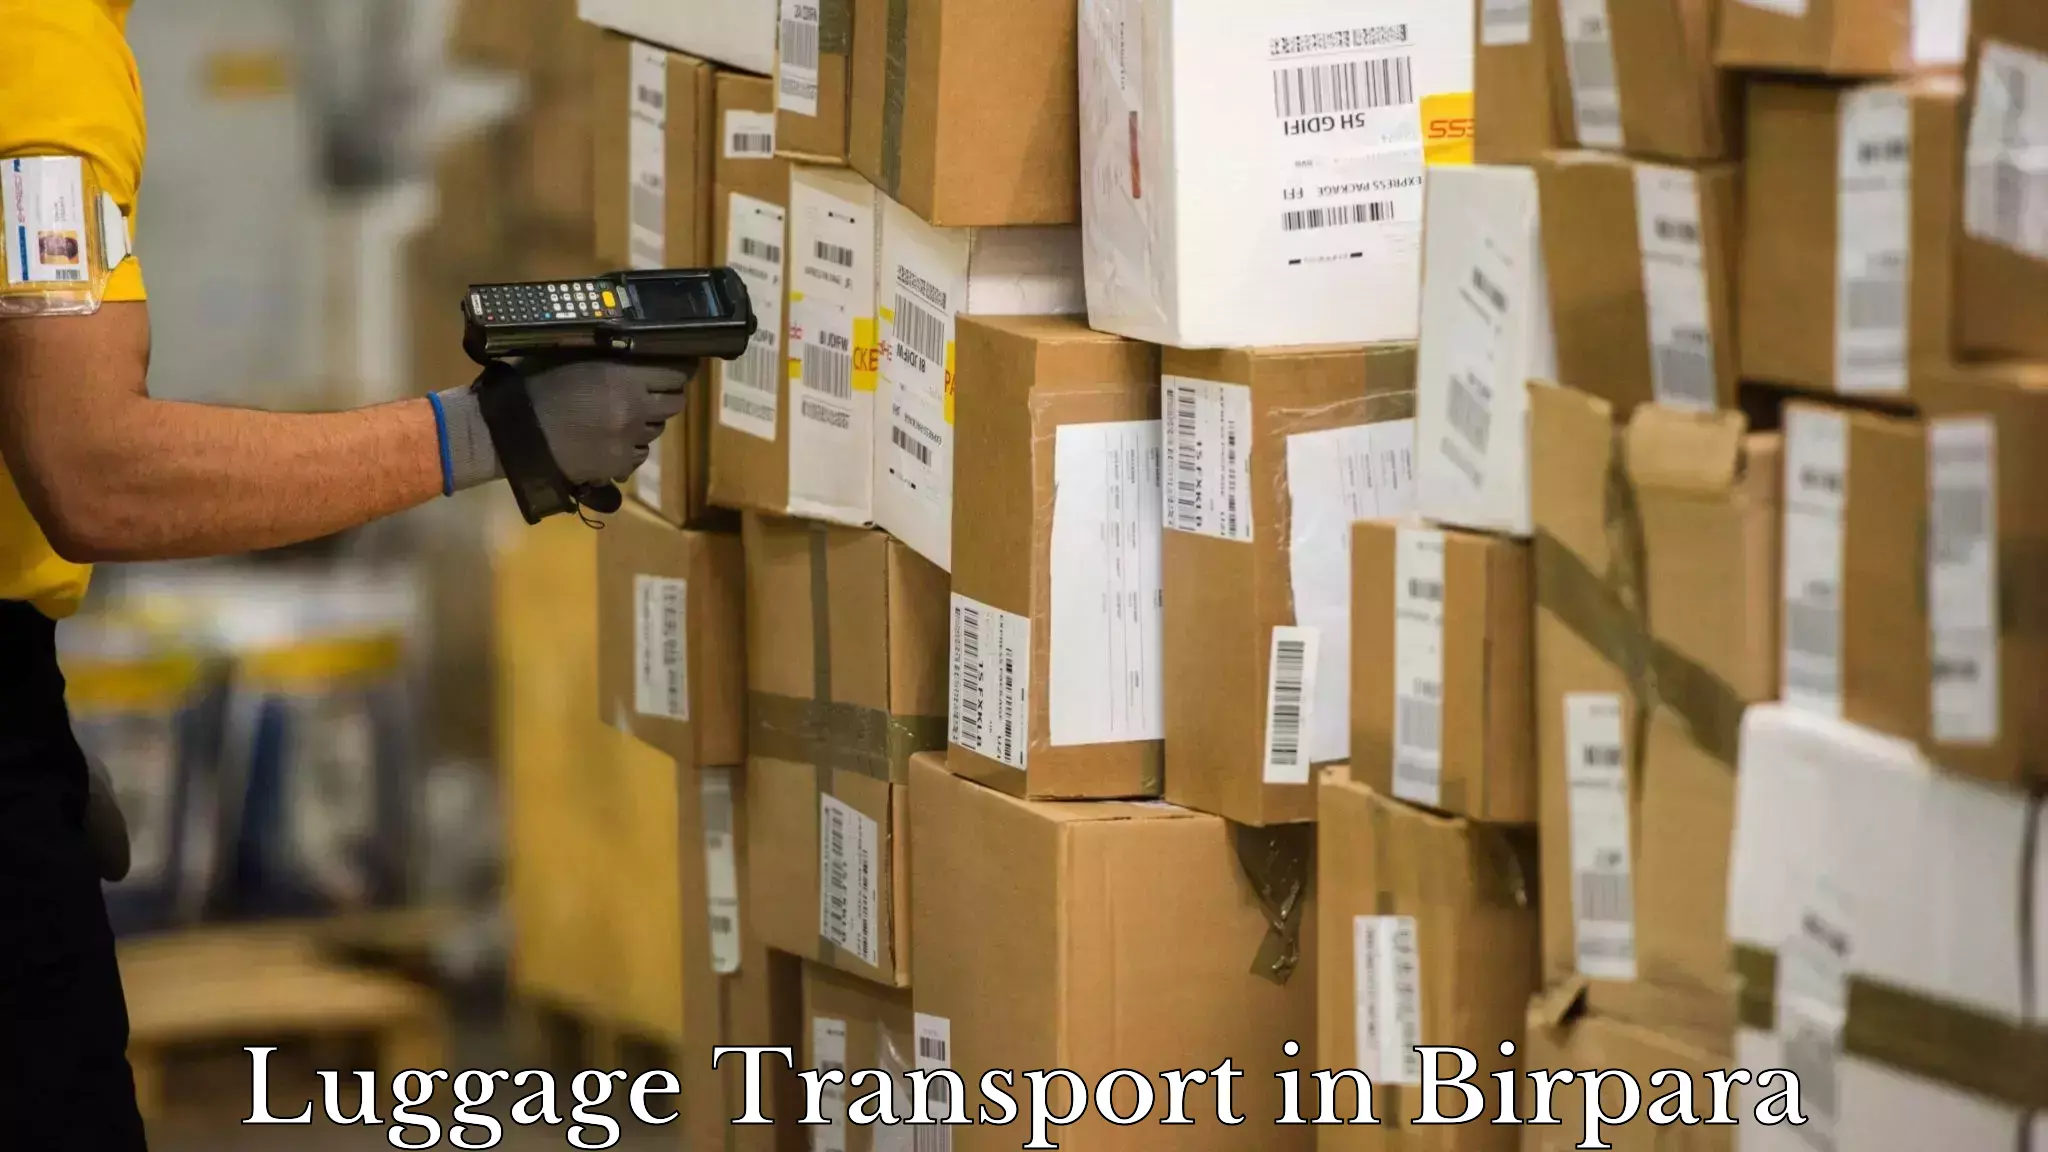 Luggage shipment specialists in Birpara